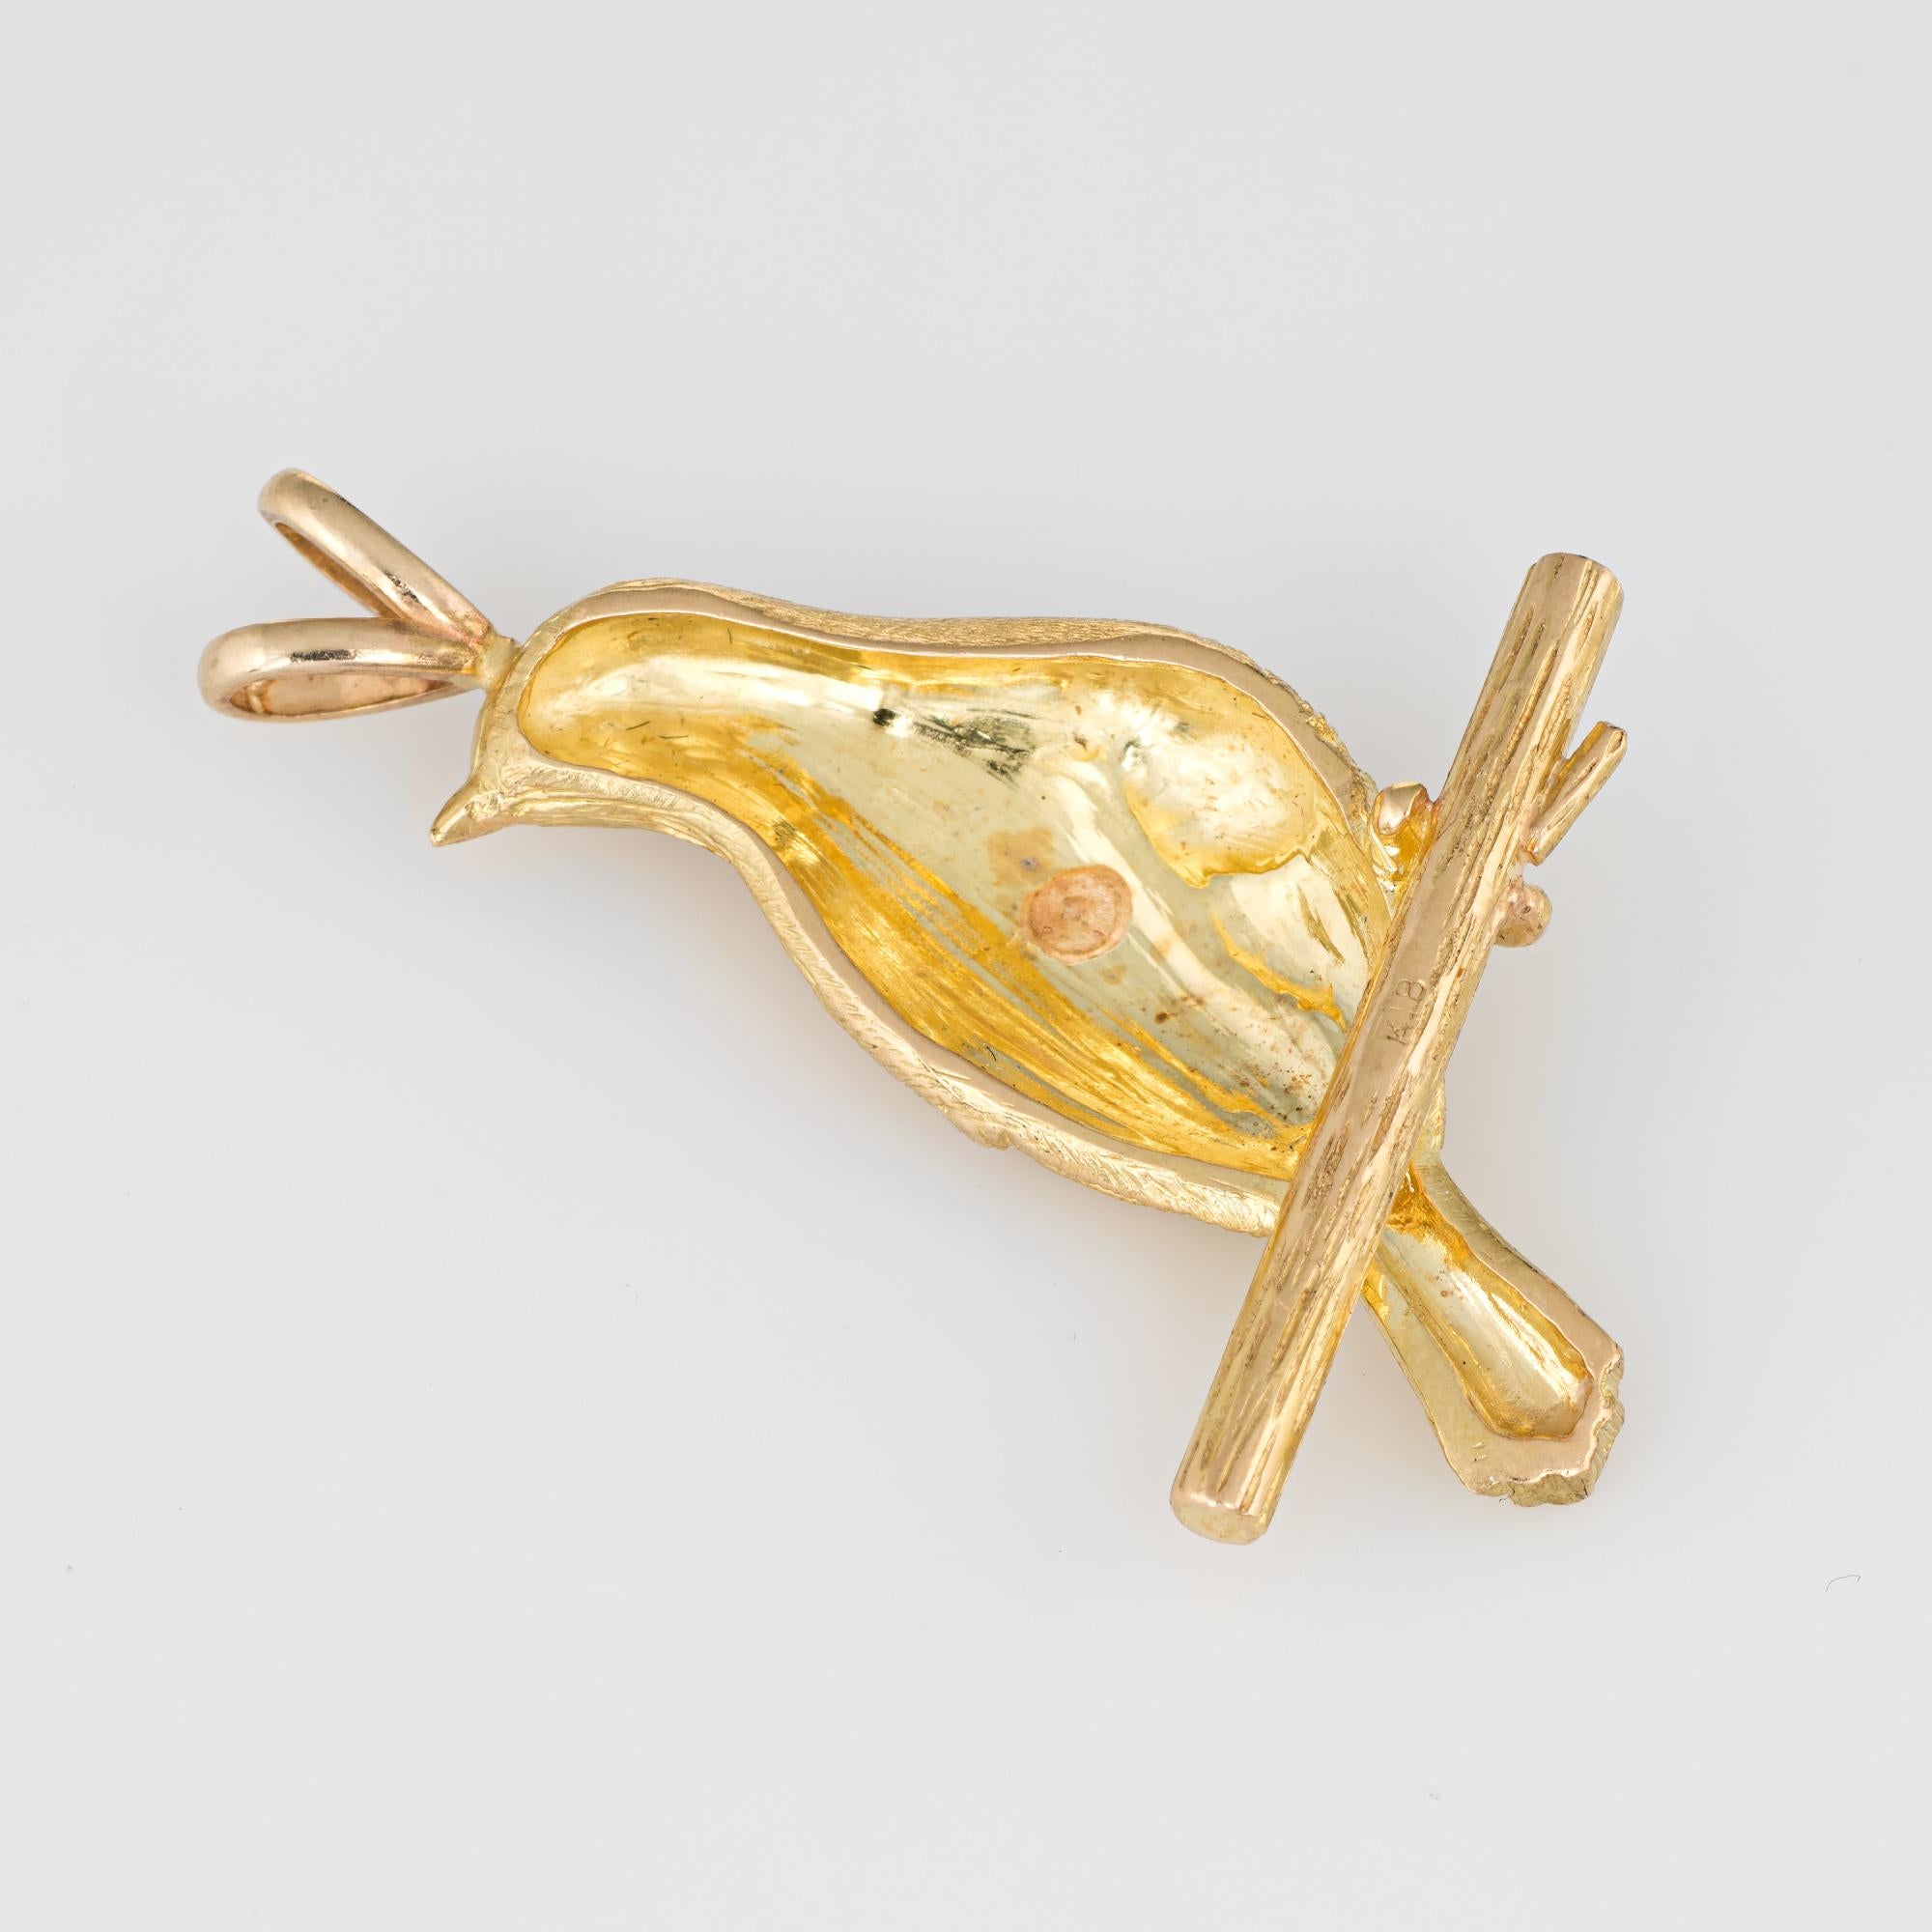 Finely detailed vintage bird on a branch pendant crafted in 18k yellow gold.  

The nicely detailed pendant can be worn on a chain or as a charm on a bracelet. The bird features lifelike detail with a muted brushed gold effect.    

The pendant is